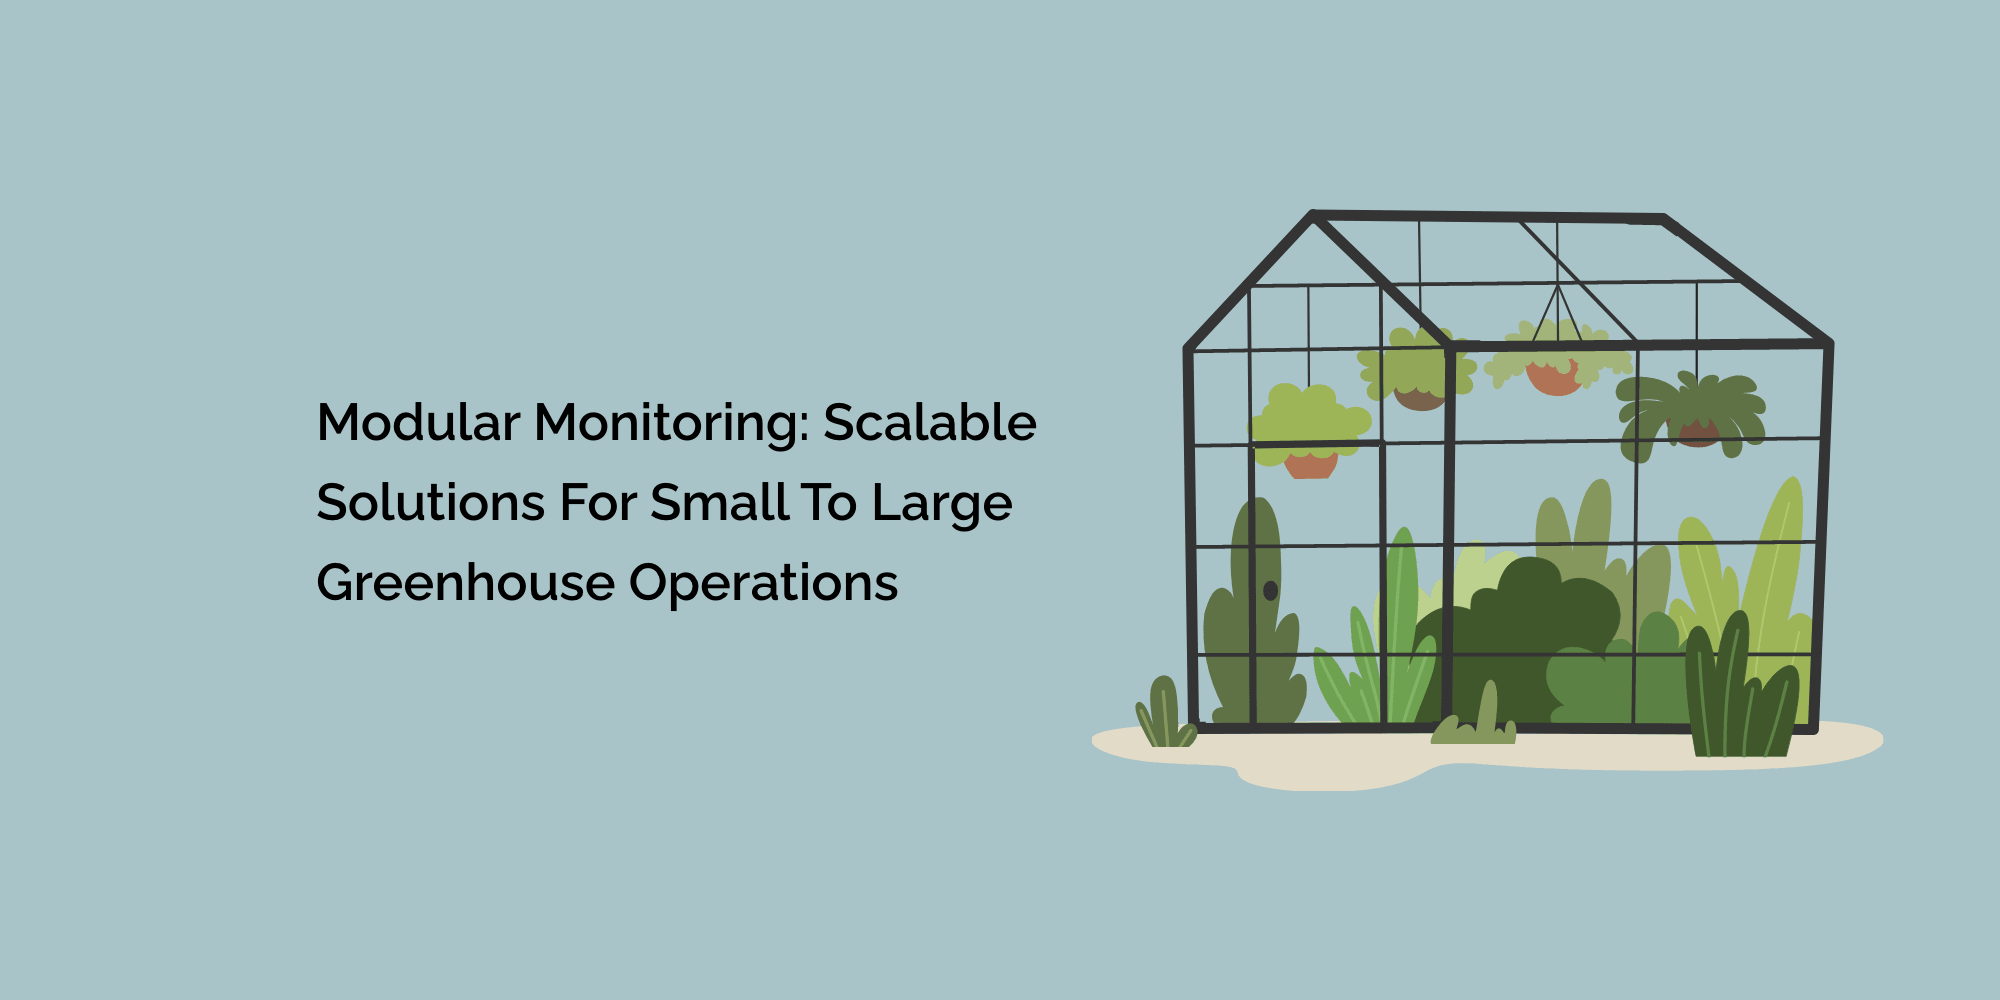 Modular Monitoring: Scalable Solutions for Small to Large Greenhouse Operations